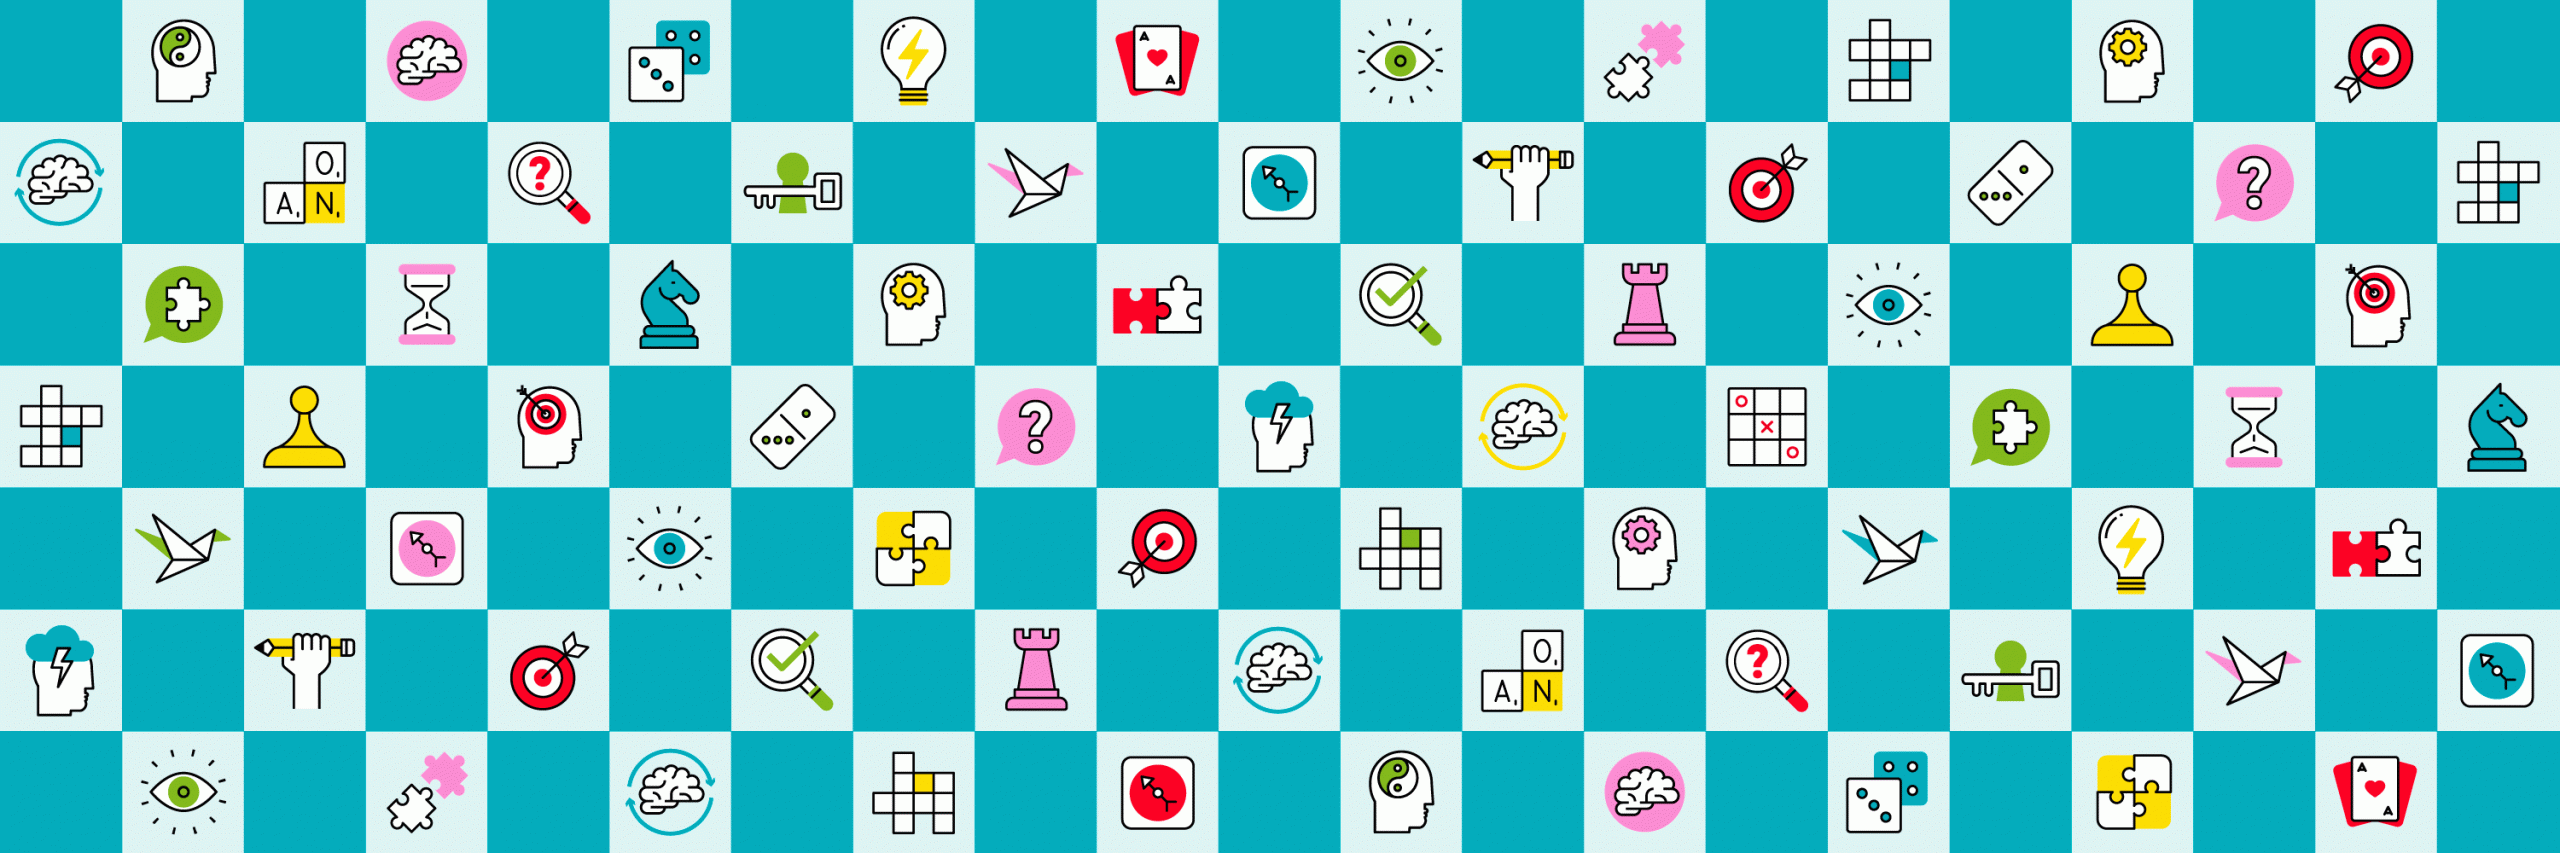 Fun Brain Games, Quizzes and Puzzles for Everyone